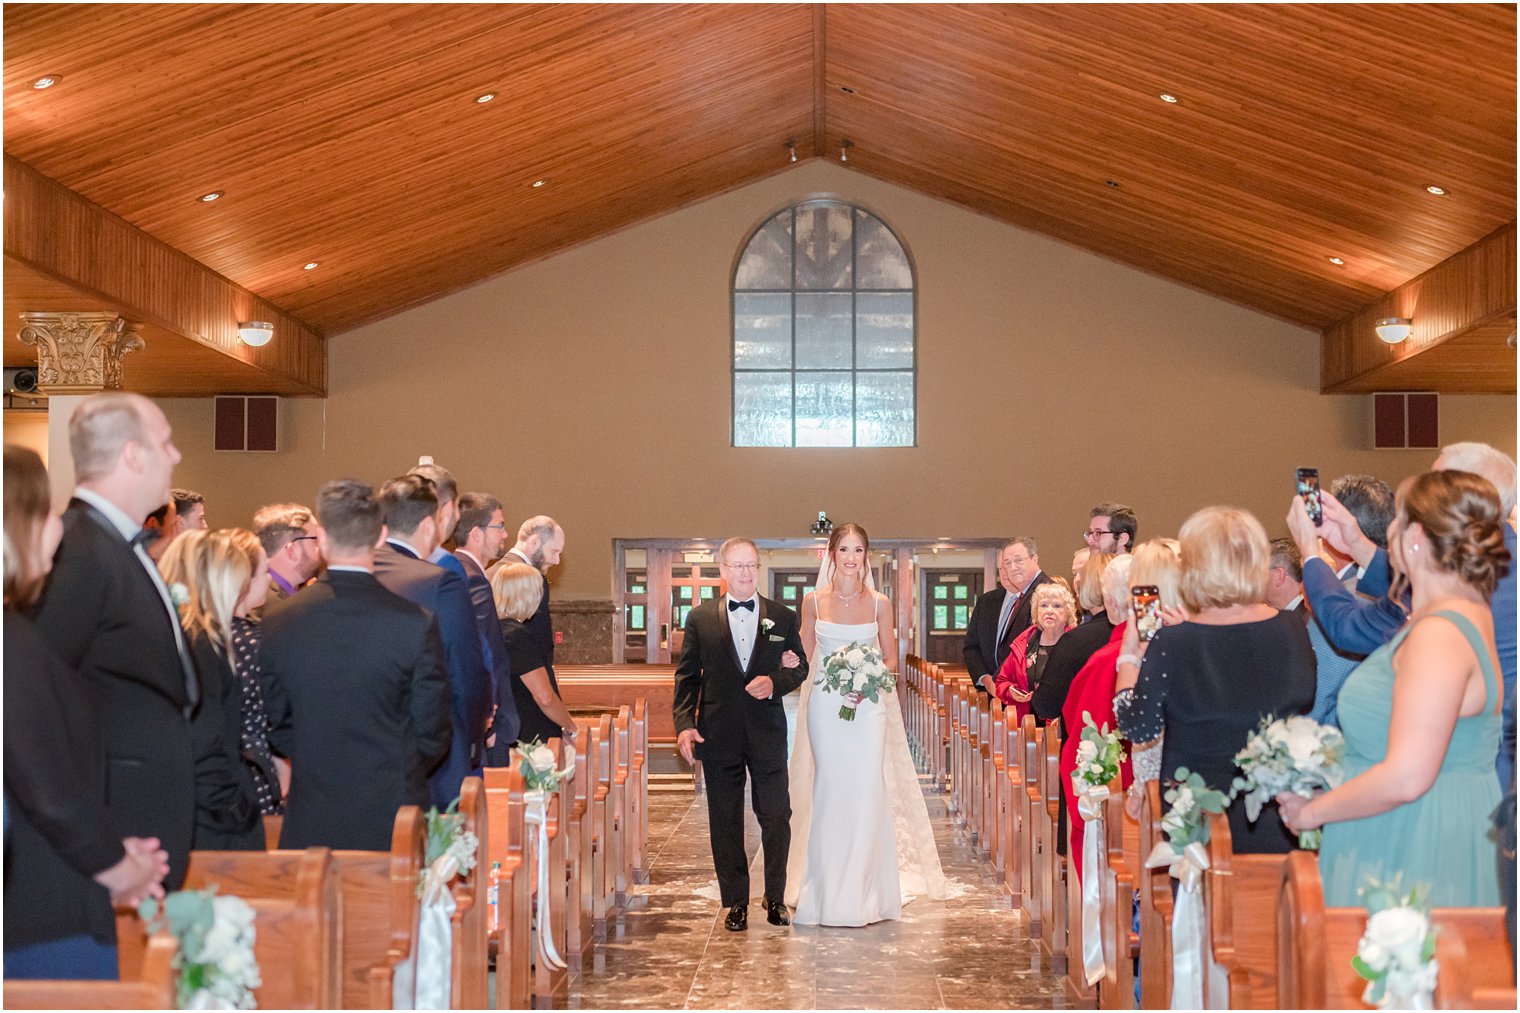 bride escorted by father walk down aisle for traditional church ceremony in small New Jersey church